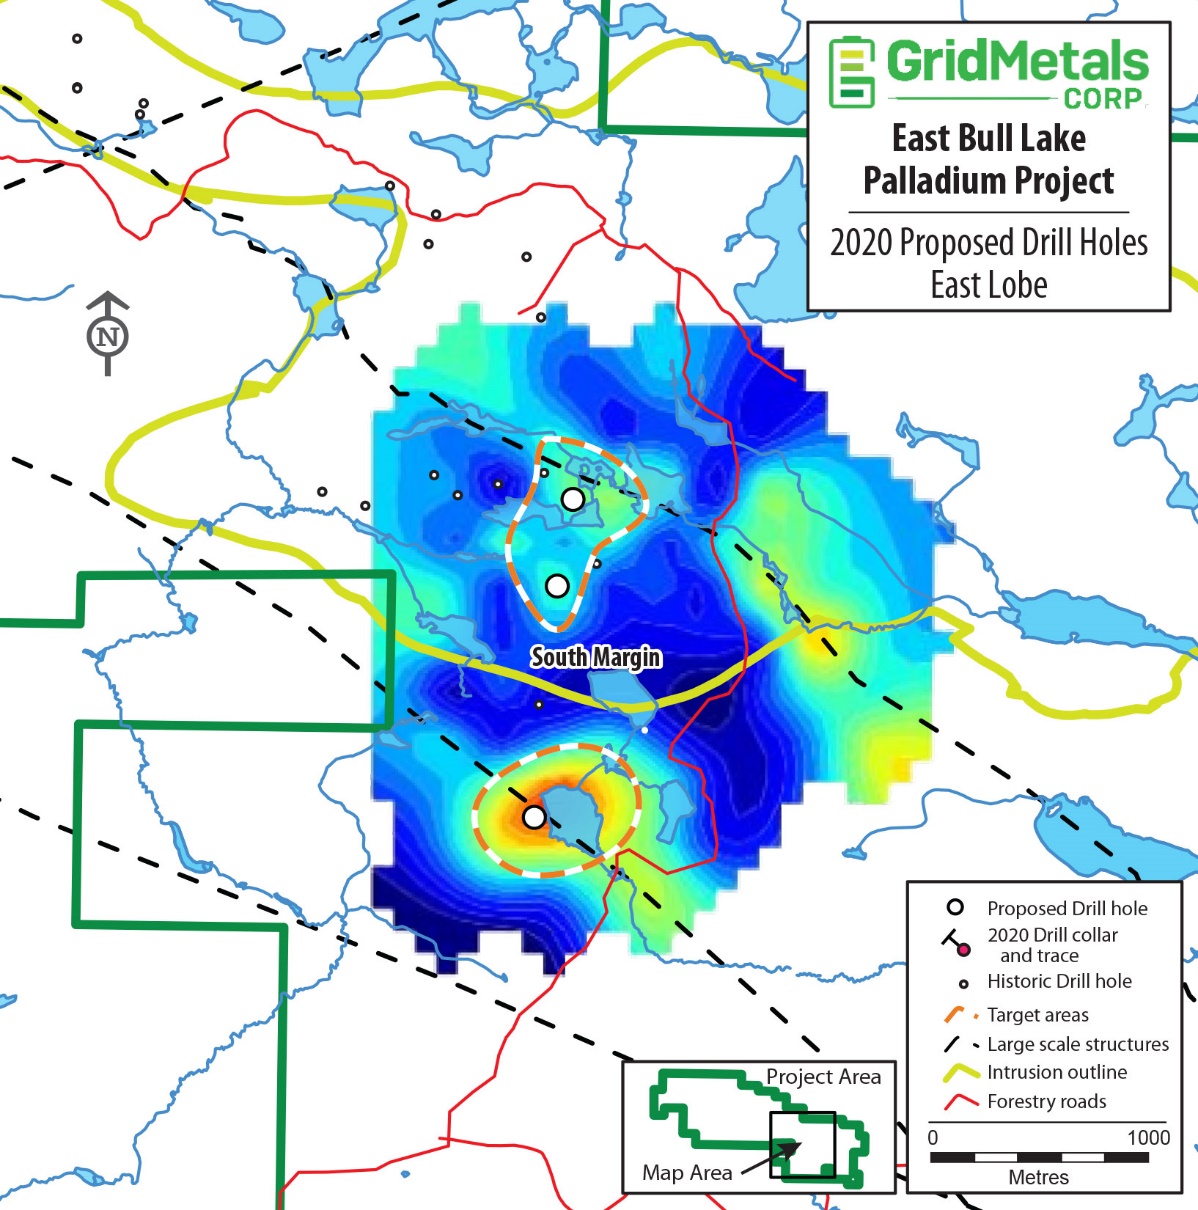 Grid Metals Corp., Thursday, August 6, 2020, Press release picture